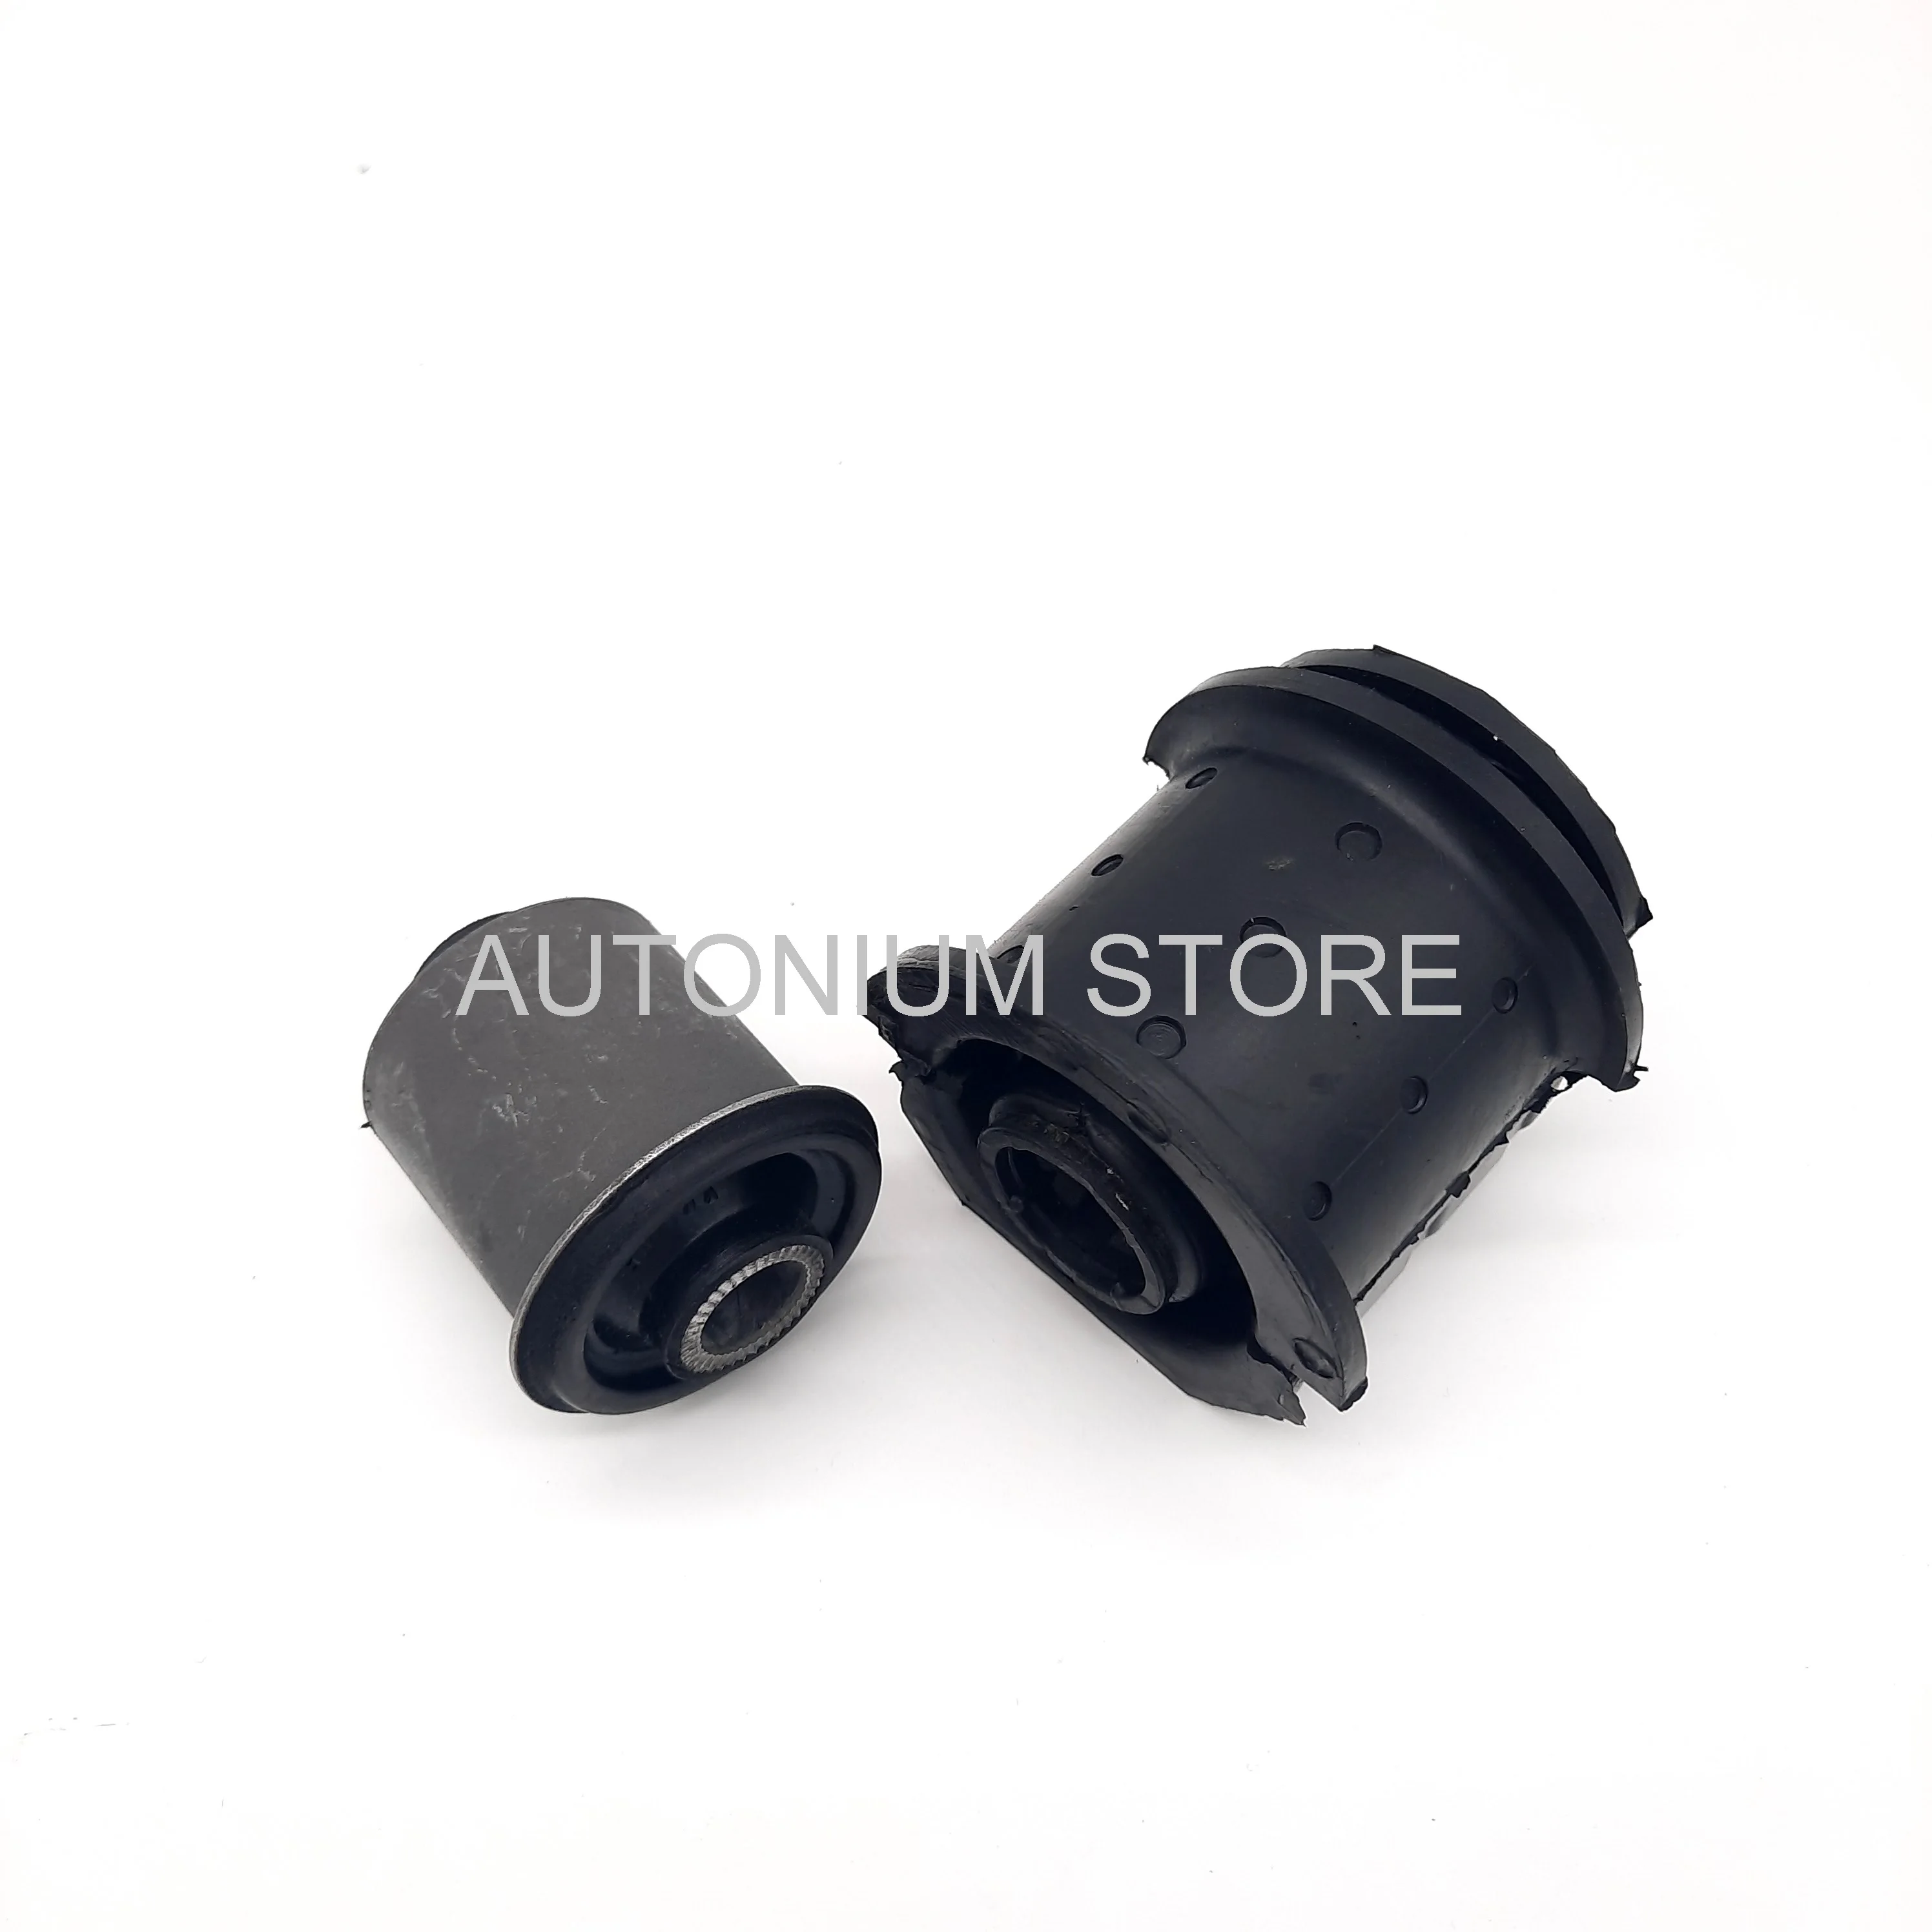 

1 Pair Front Lower Control Arm Bushing for NISSAN LARGO W30 1993-1999, NISSAN SERENA C23 1991-1999, NISSAN SERENA NC23